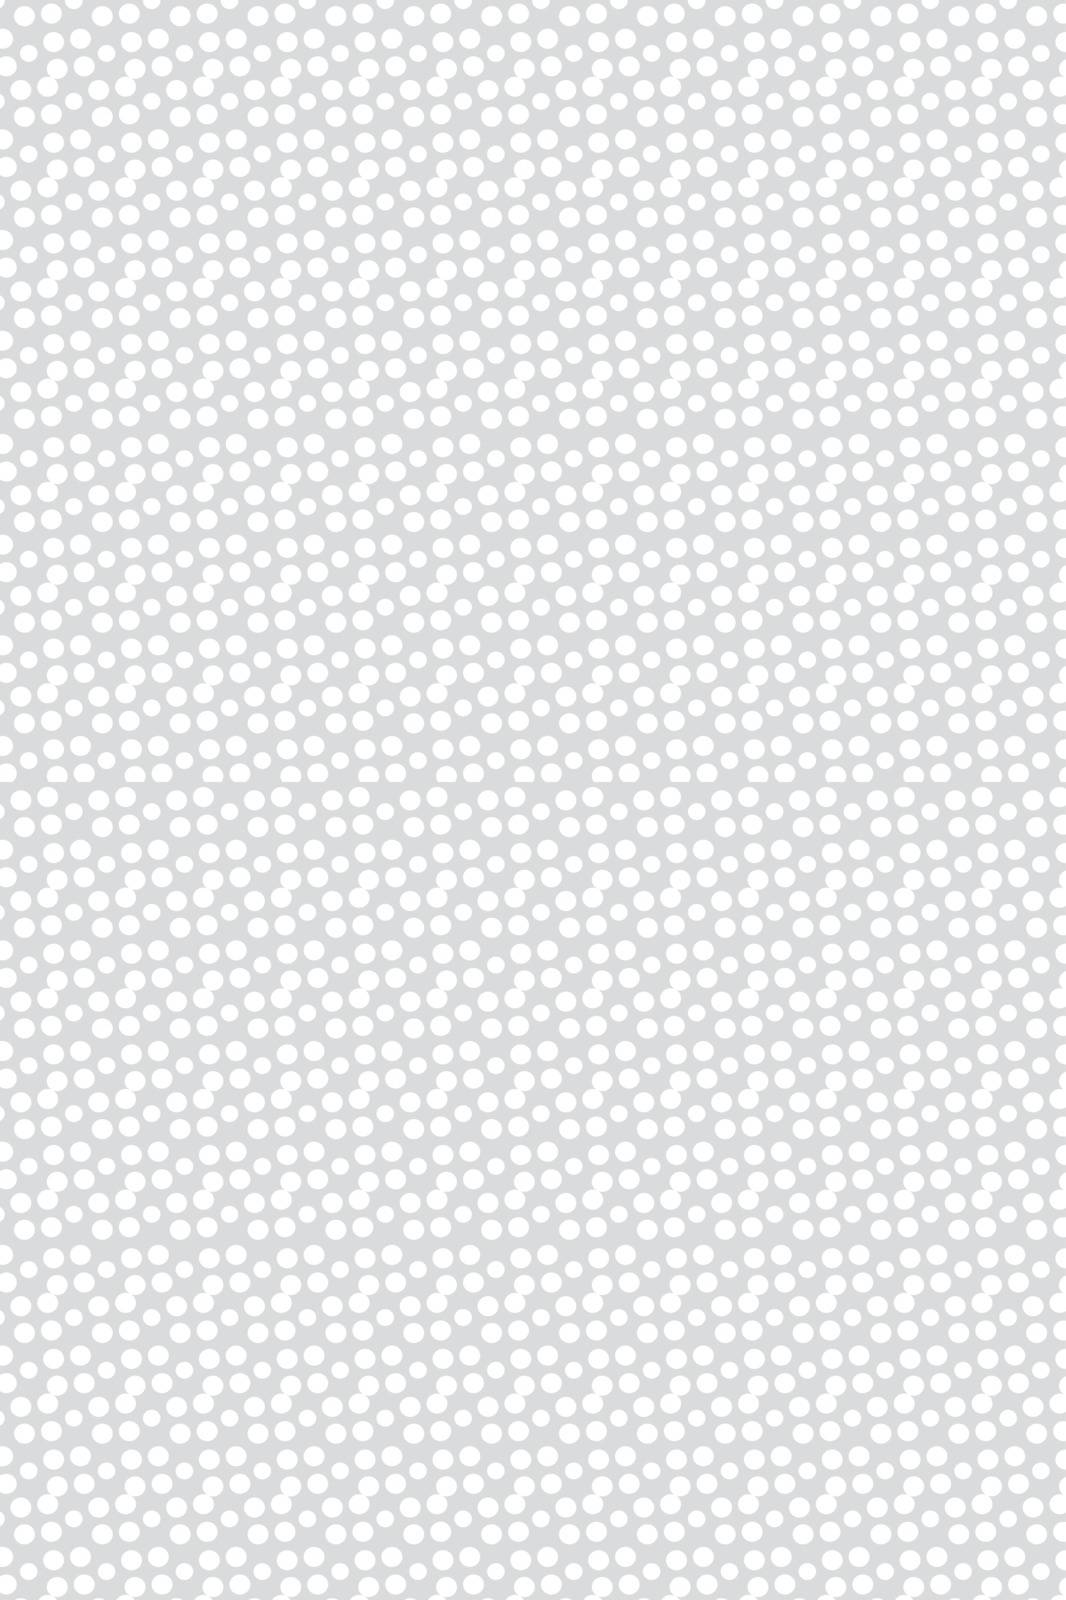 A grey dotted background over white